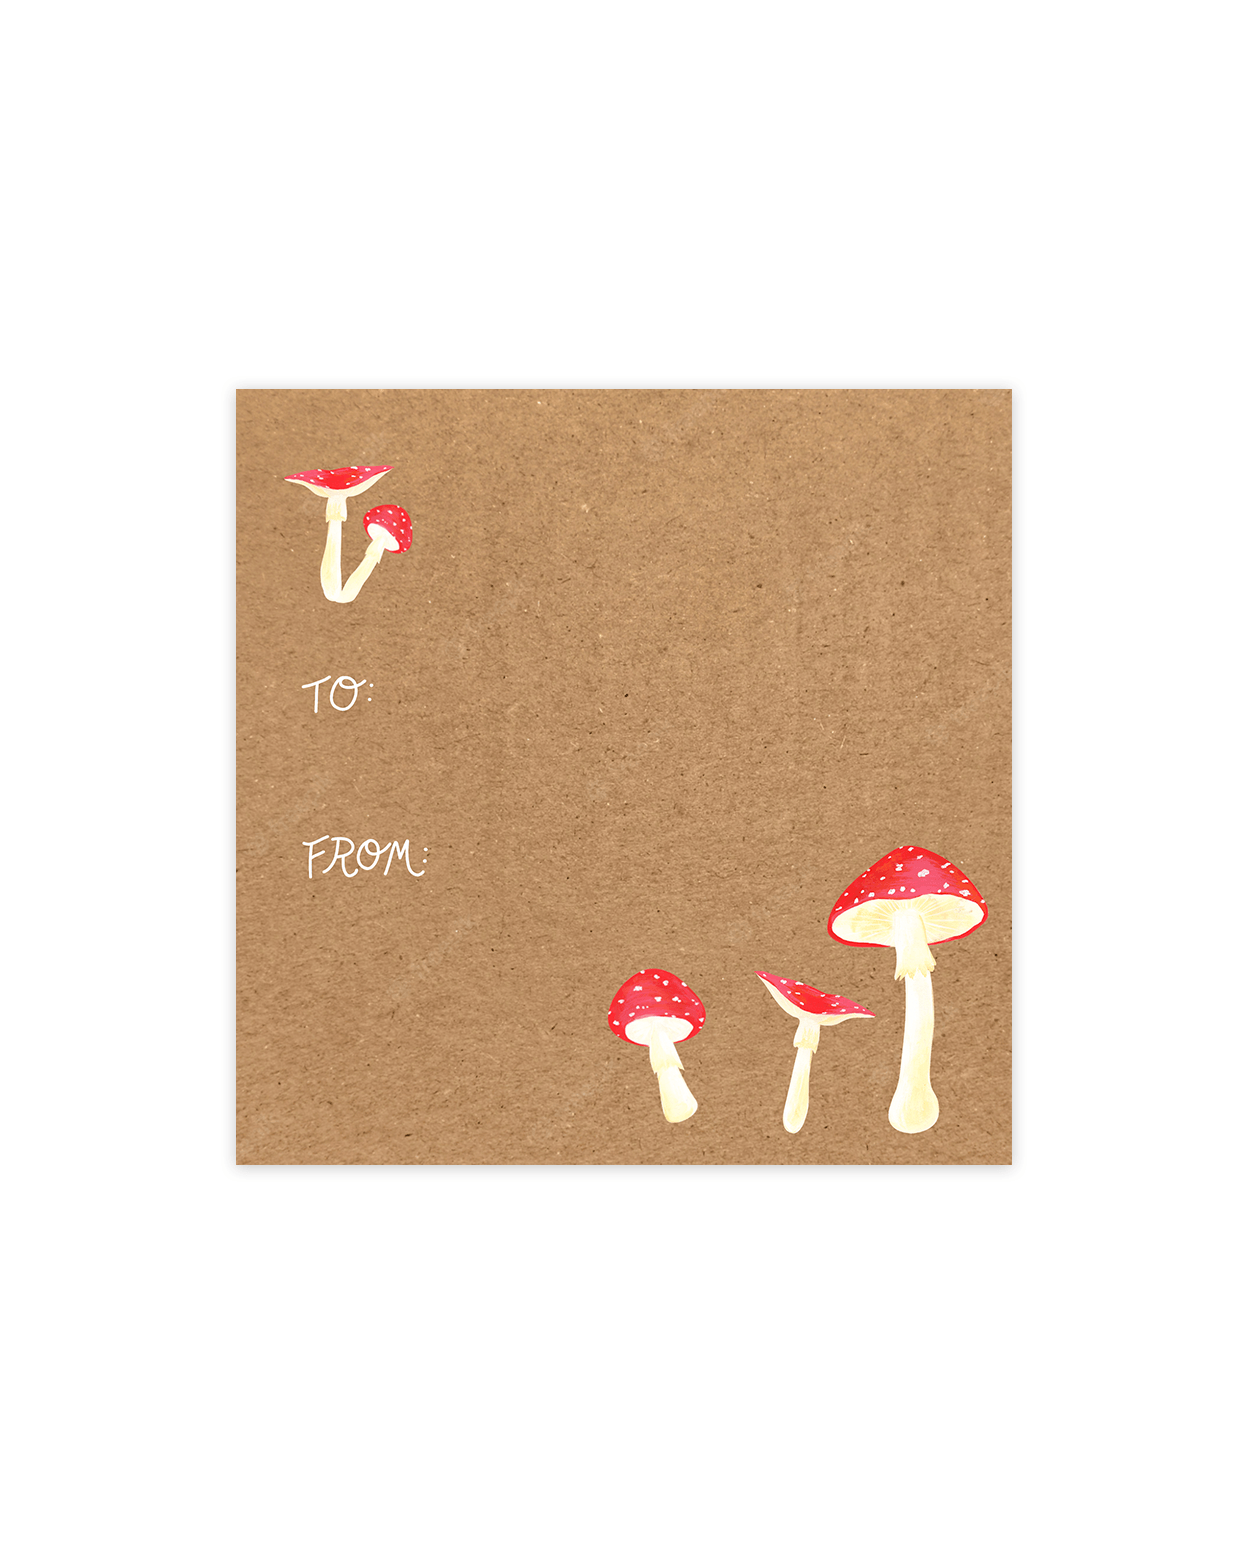 Wrapping Paper With Mushrooms, Mushroom Wrapping Paper Roll, Mushroom  Lovers, Mushroom Gifts for Mushroom Baby Shower, Cottagecore